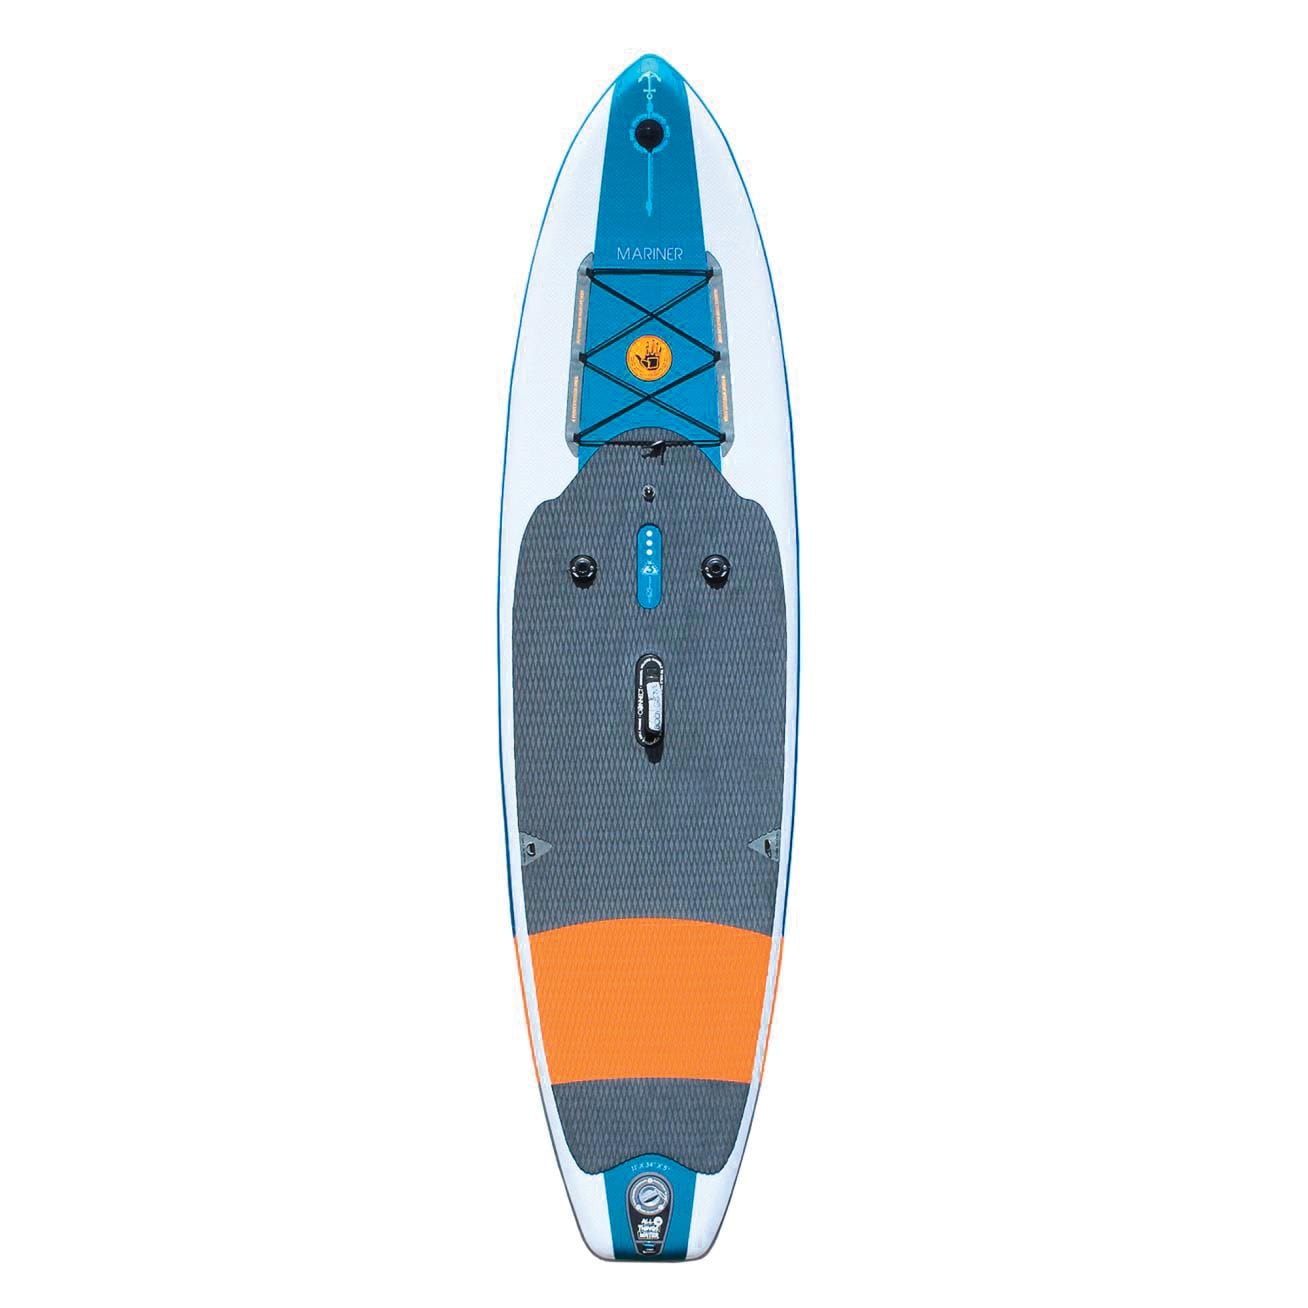 Fly fishing from a stand up paddleboard (SUP) with RAILBLAZA RAILBLAZA